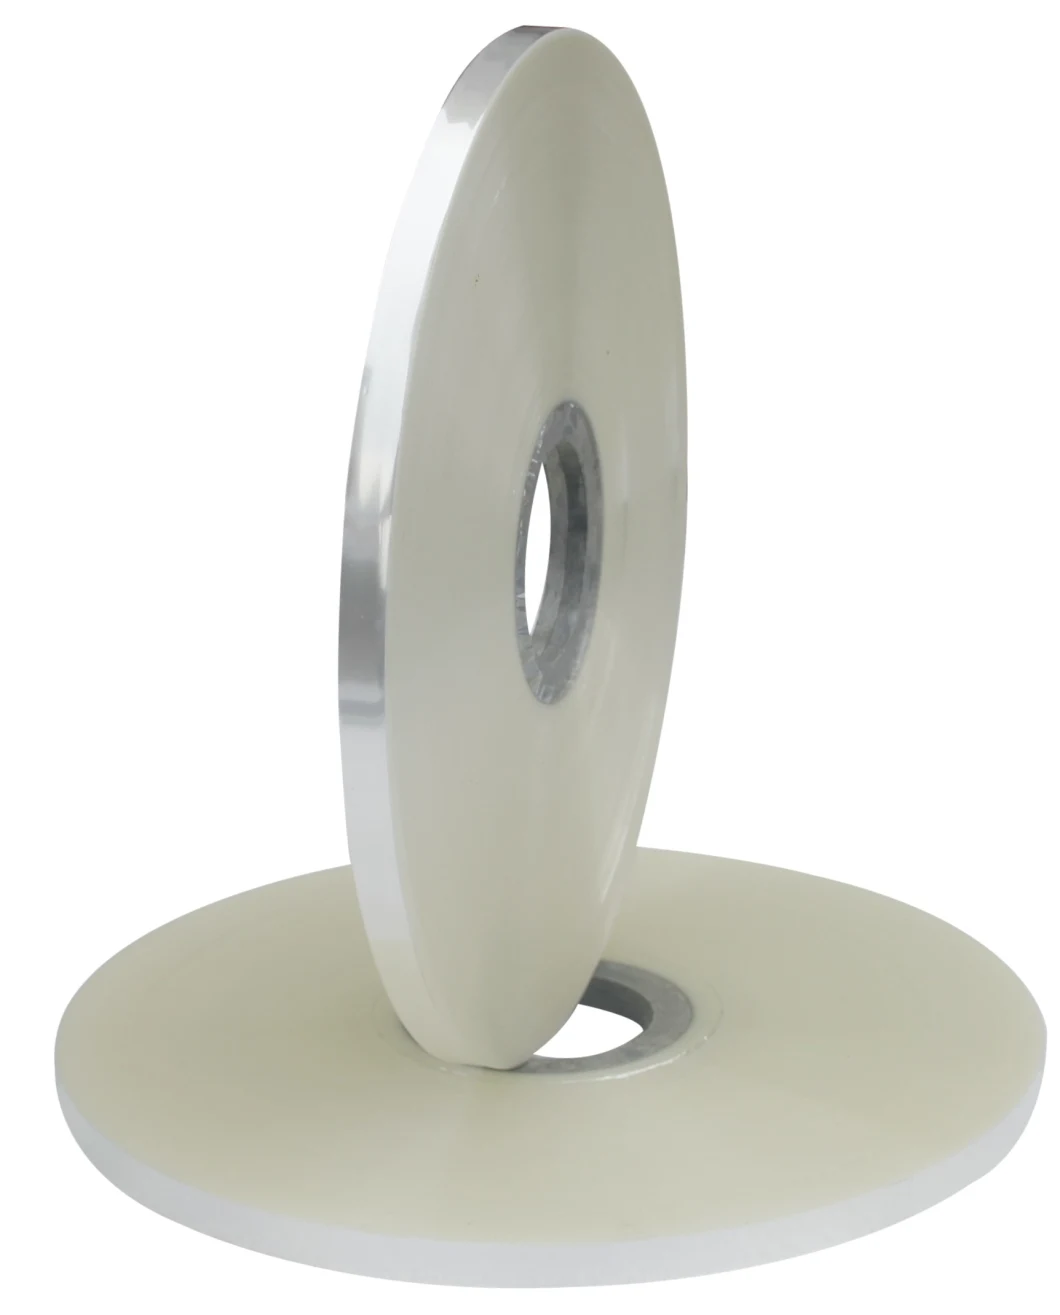 Cable Wrapping Mylar Tape Cable Pet Tape for Cable Shielding